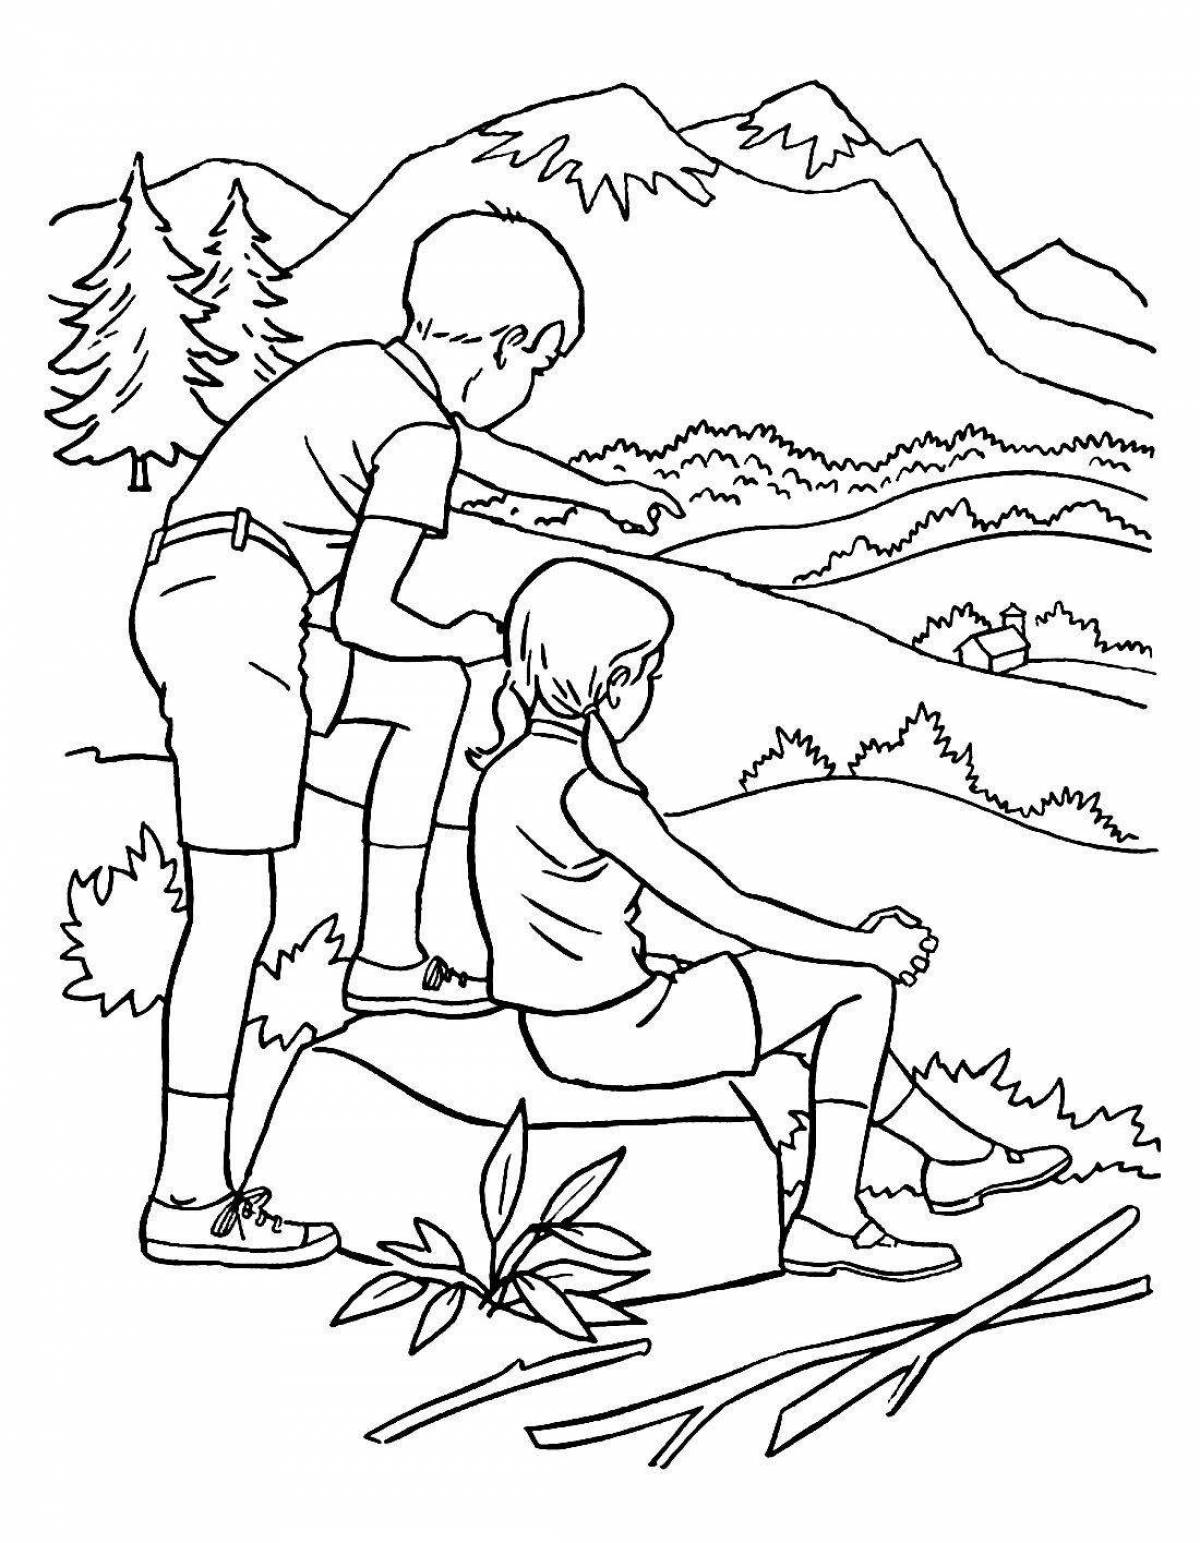 Delightful coloring page